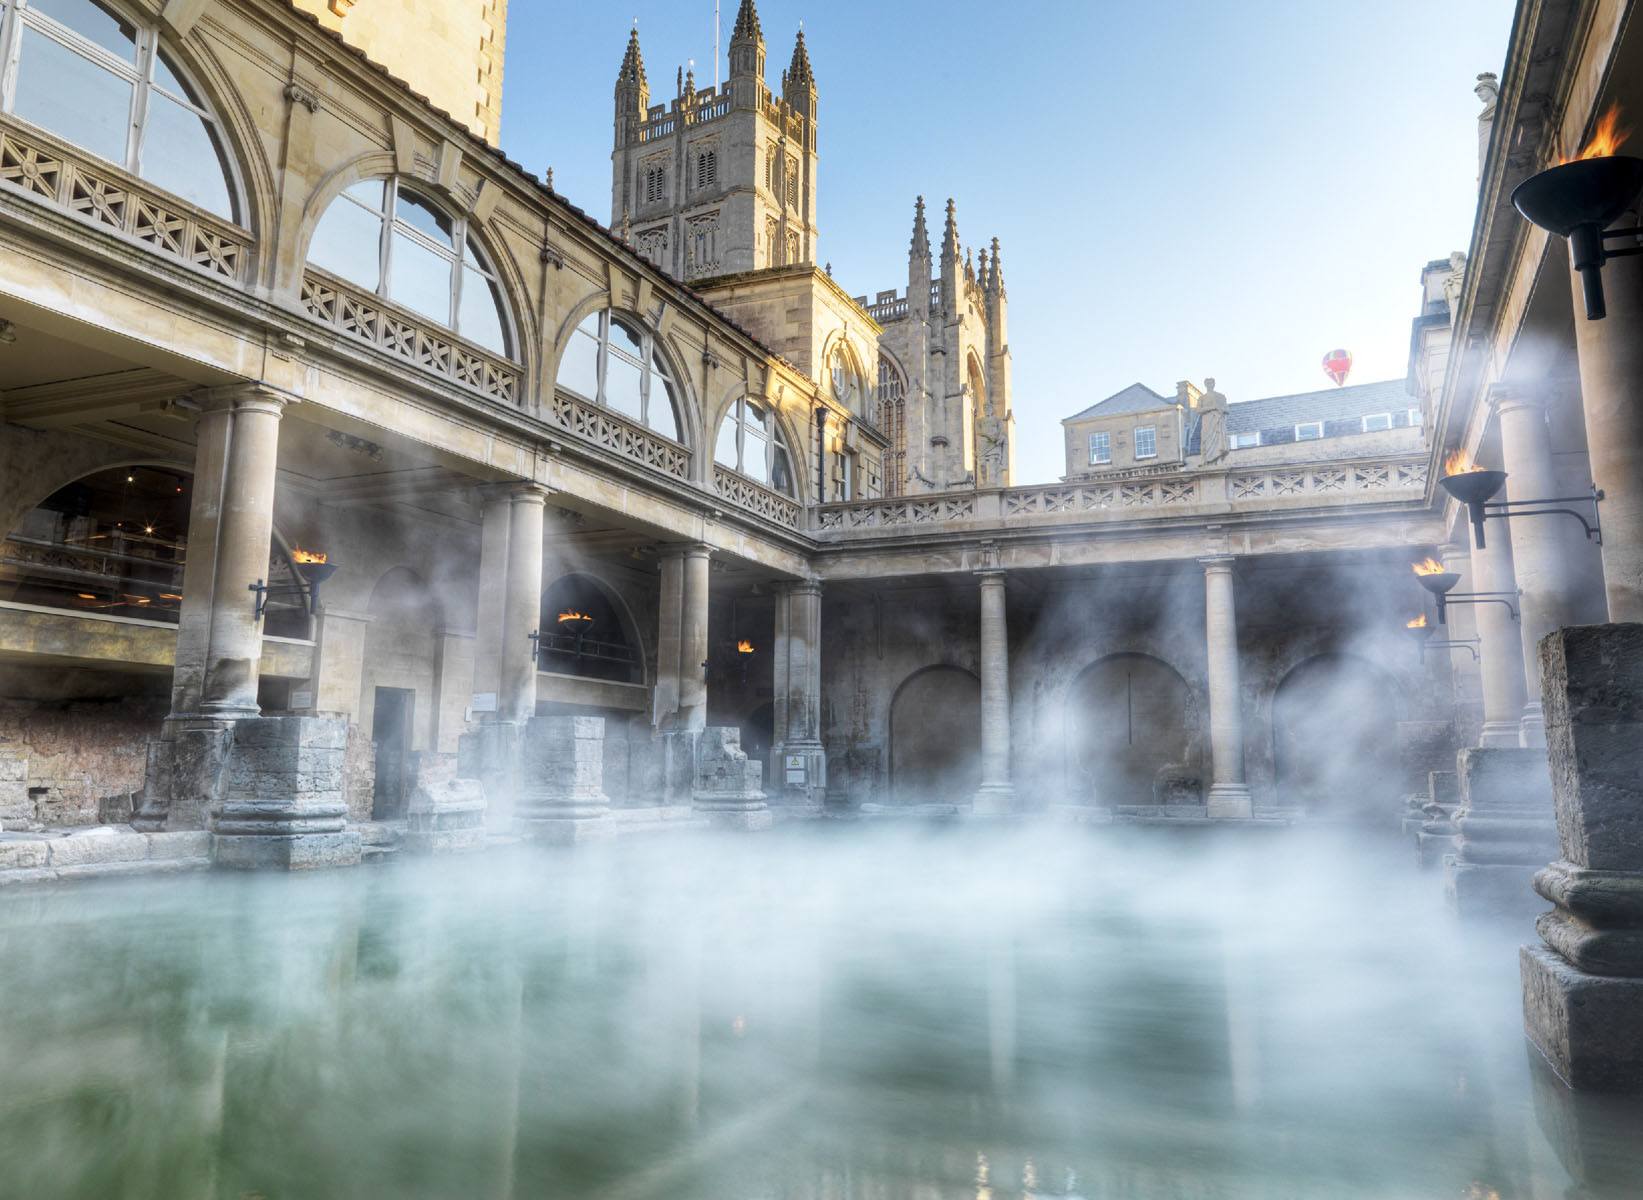 The Great Bath at the Roman Baths, with views of Bath Abbey